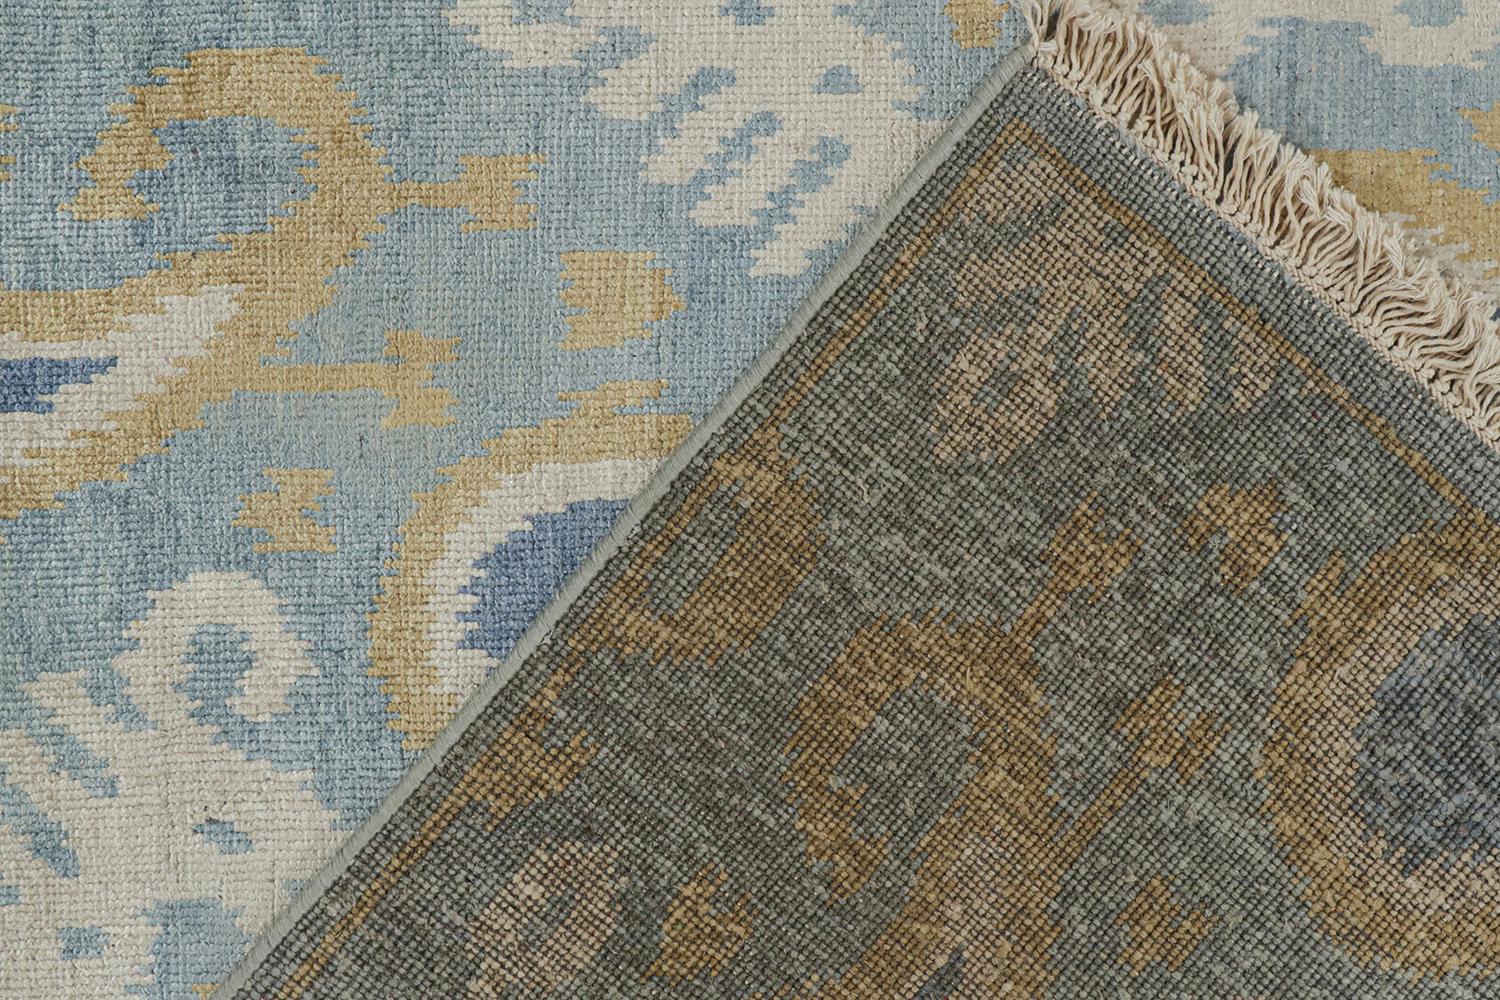 Wool Rug & Kilim’s Classic Ikats Style Rug with Gold, White and Blue Patterns For Sale